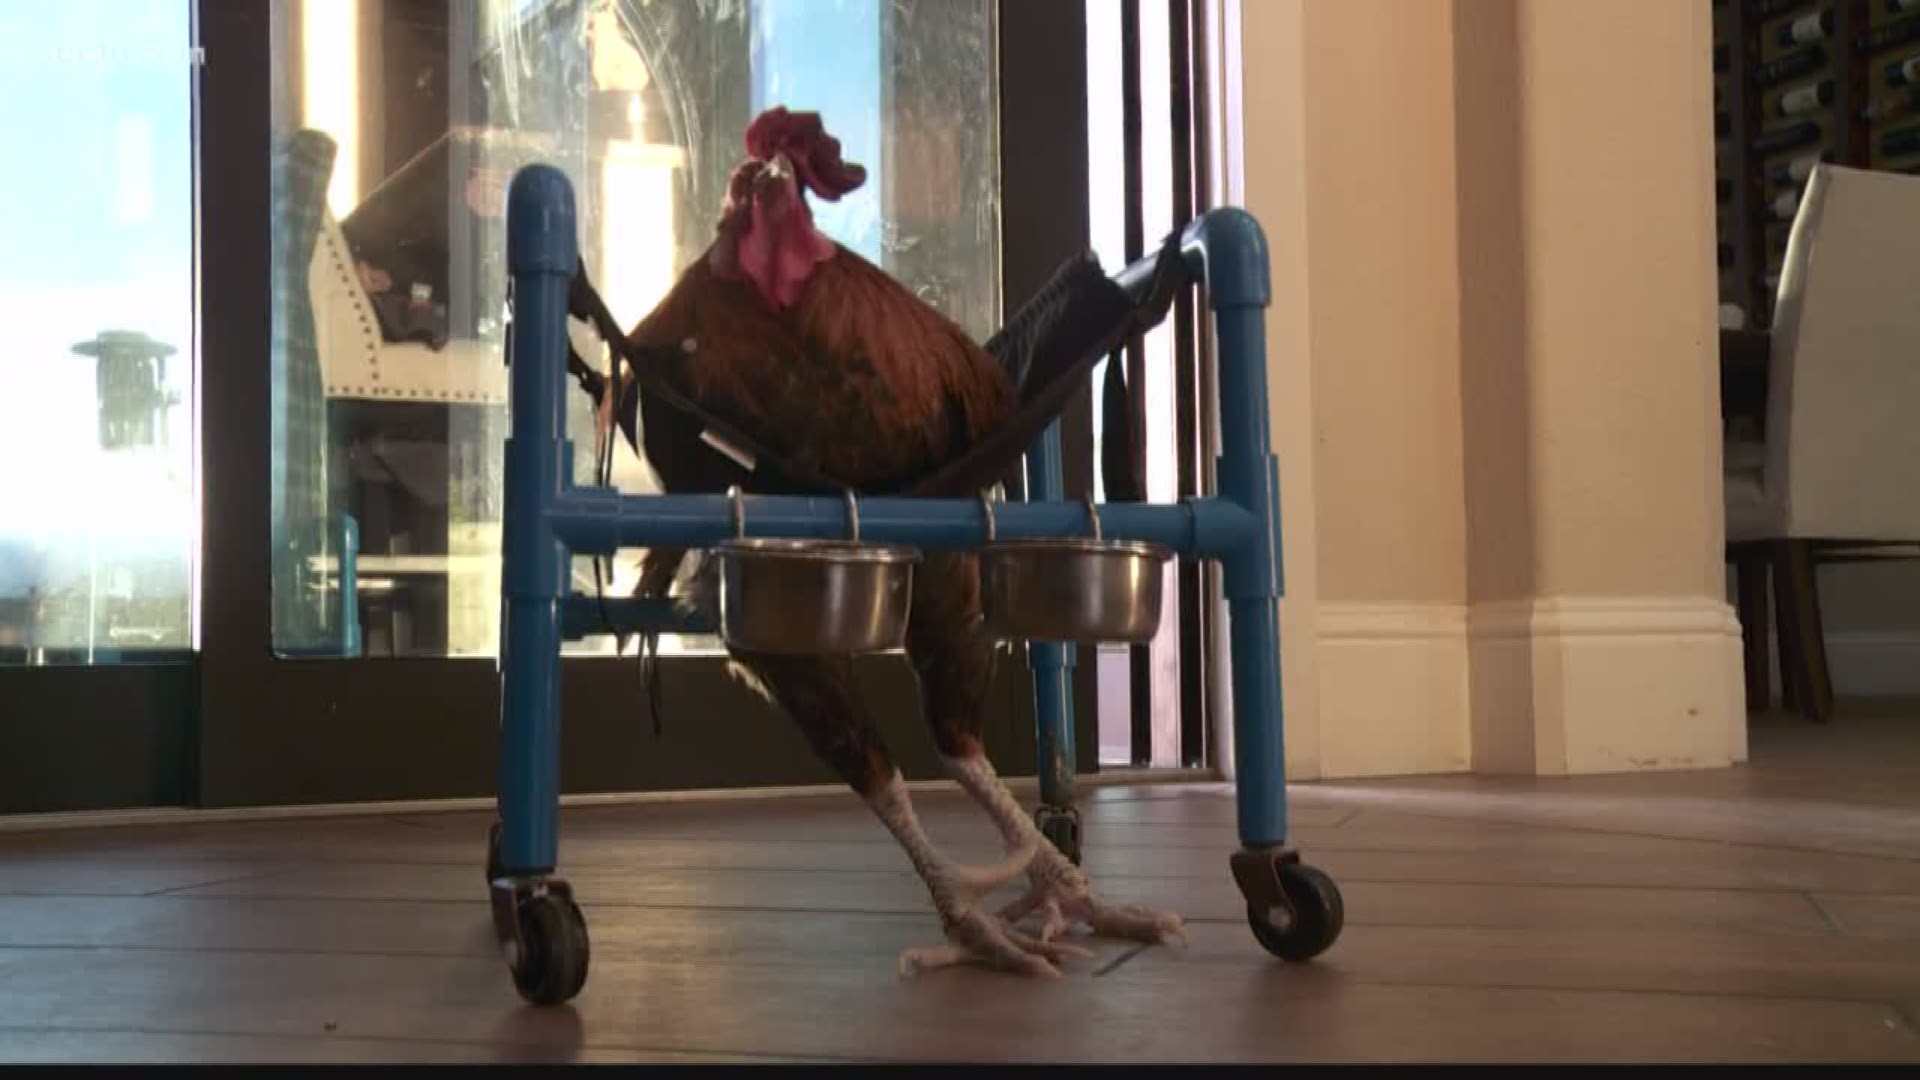 Roo the rooster is learning how to walk again with the help of a wheelchair (November 22, 2017)